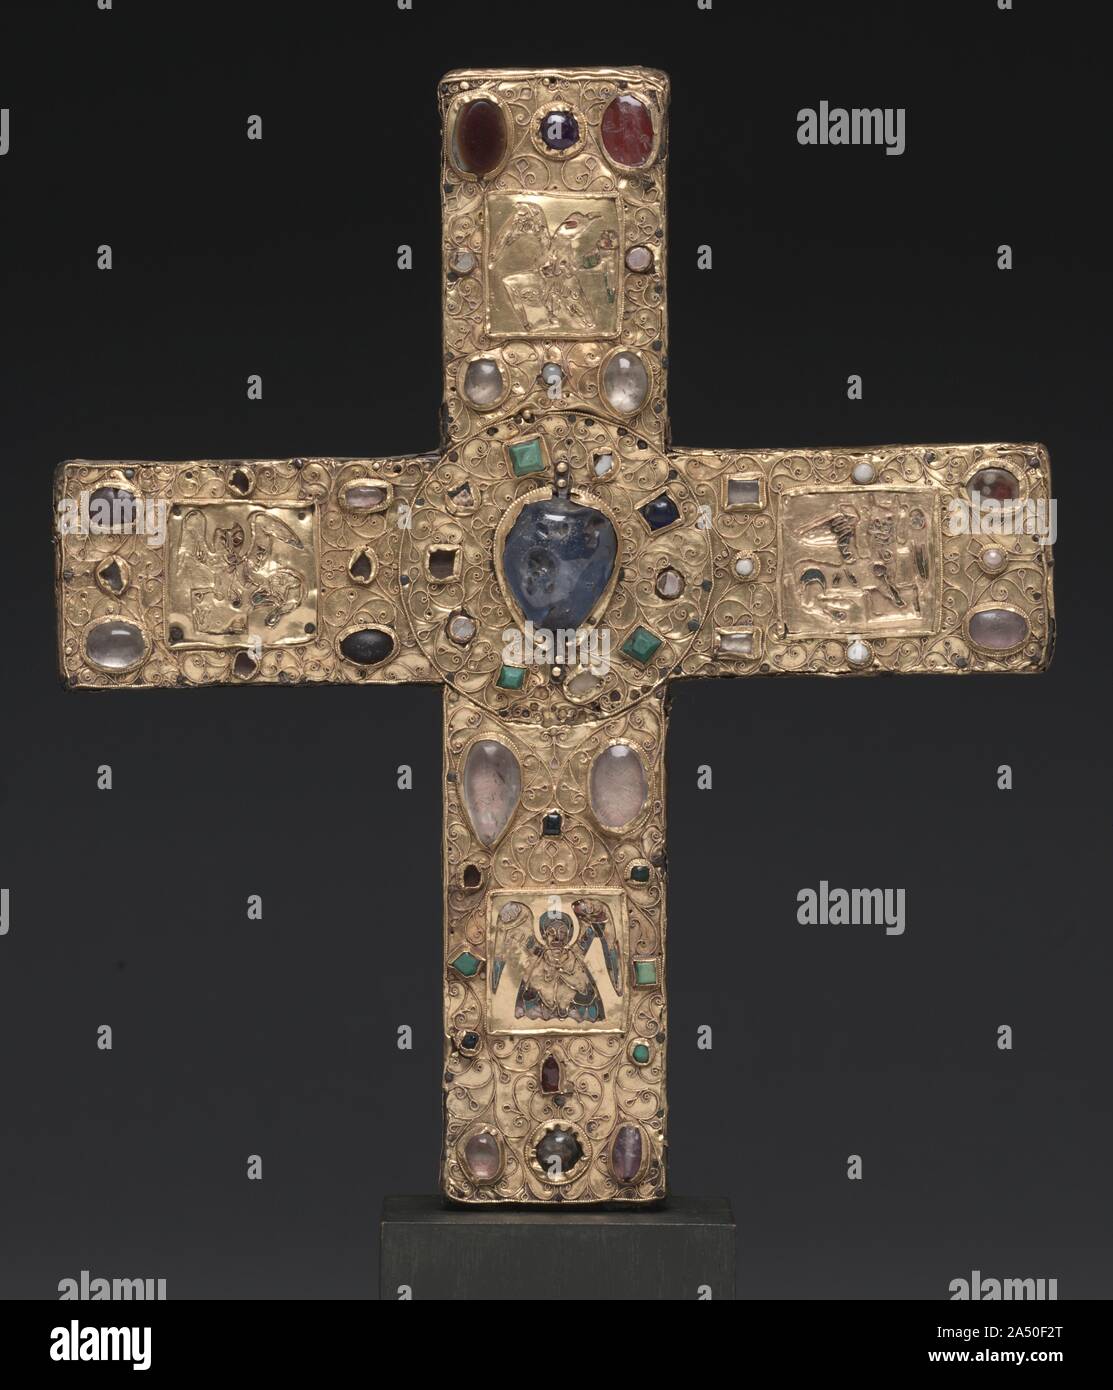 Ceremonial Cross of Countess Gertrude, 1038 or shortly after. This precious gold cross was commissioned by Countess Gertrude (died 1077) and given to the church of Saint Blaise following the death of her husband, Count Liudolf of Brunswick (died 1038). The cross was intended to be carried in liturgical processions or to be placed on a church altar. The inclusion of relics within the crosses endowed them with an additional role as devotional objects. At the center of the four cross arms, fine but much damaged cloisonn&#xe9; enamel plaques represent the symbols of the four Evangelists--an eagle Stock Photo